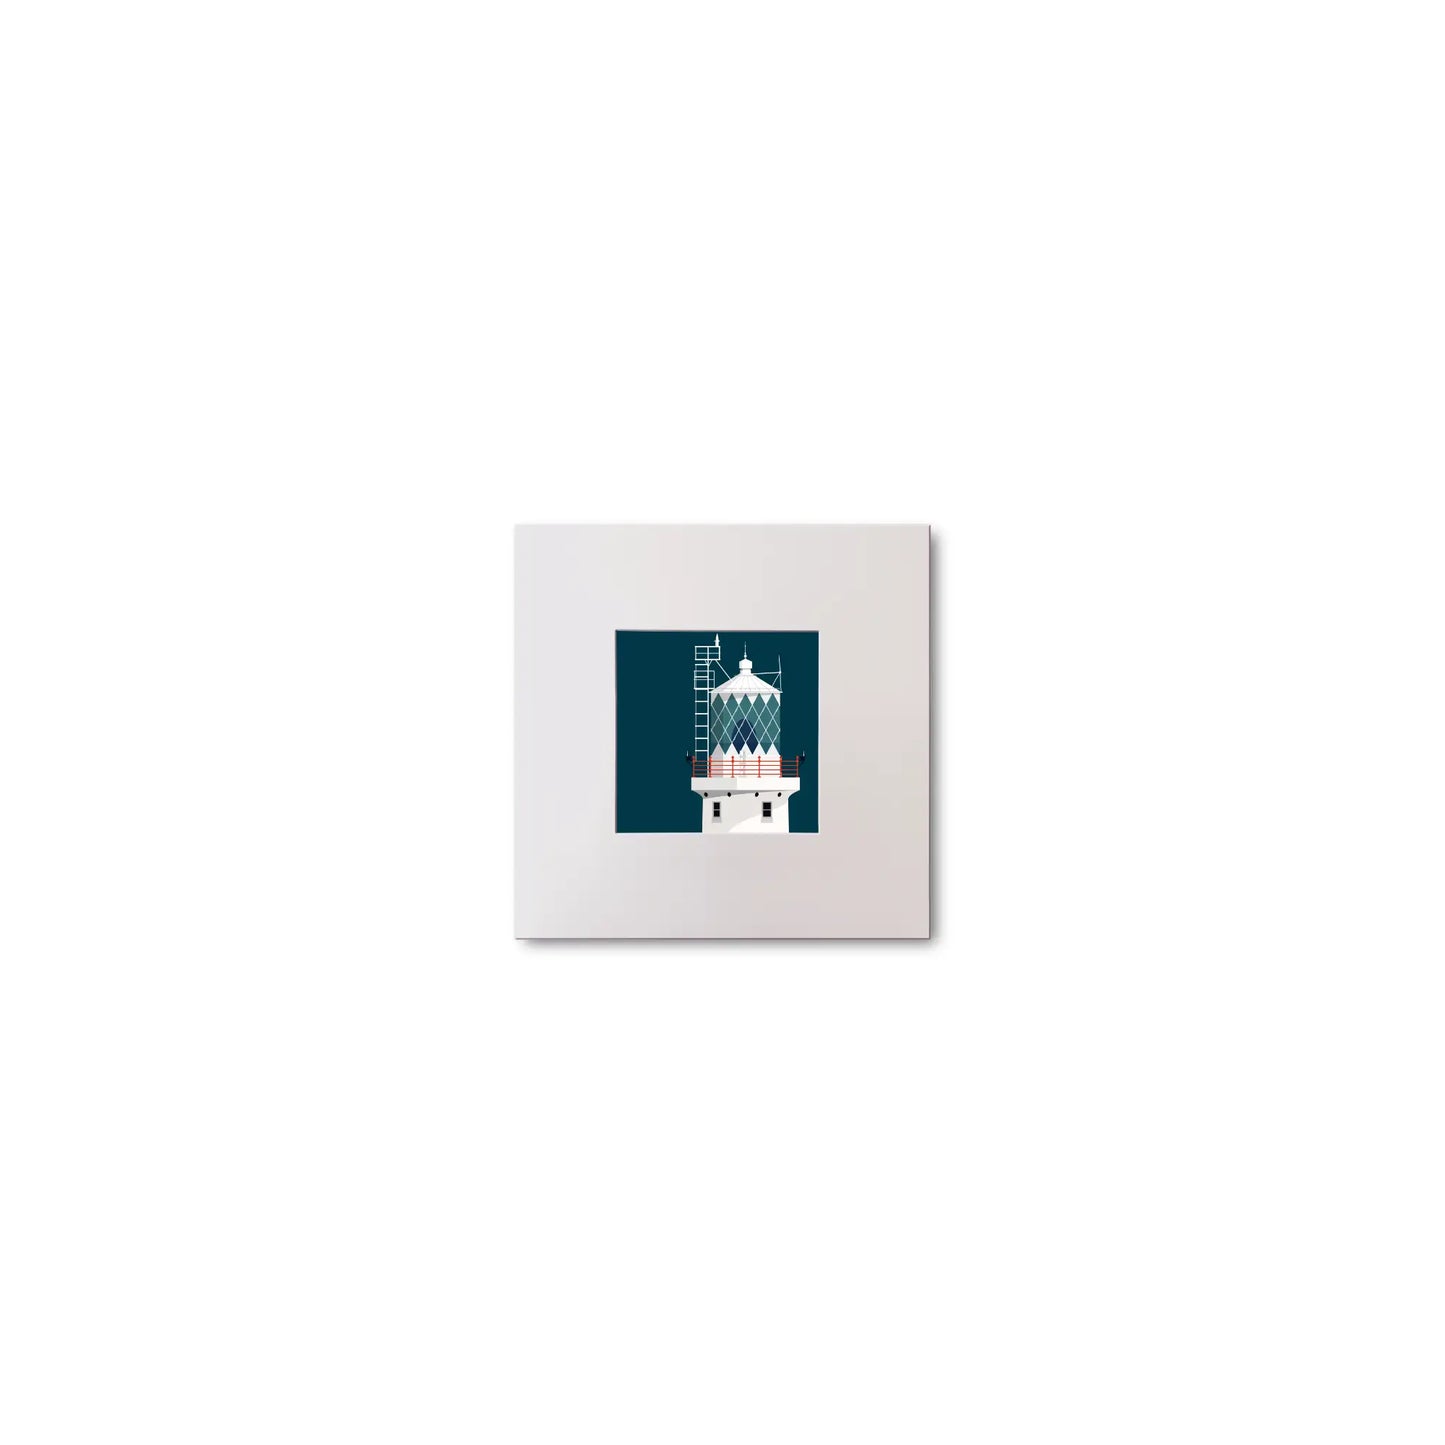 Illustration of Tuskar Rock lighthouse on a midnight blue background, mounted and measuring 10x10cm.